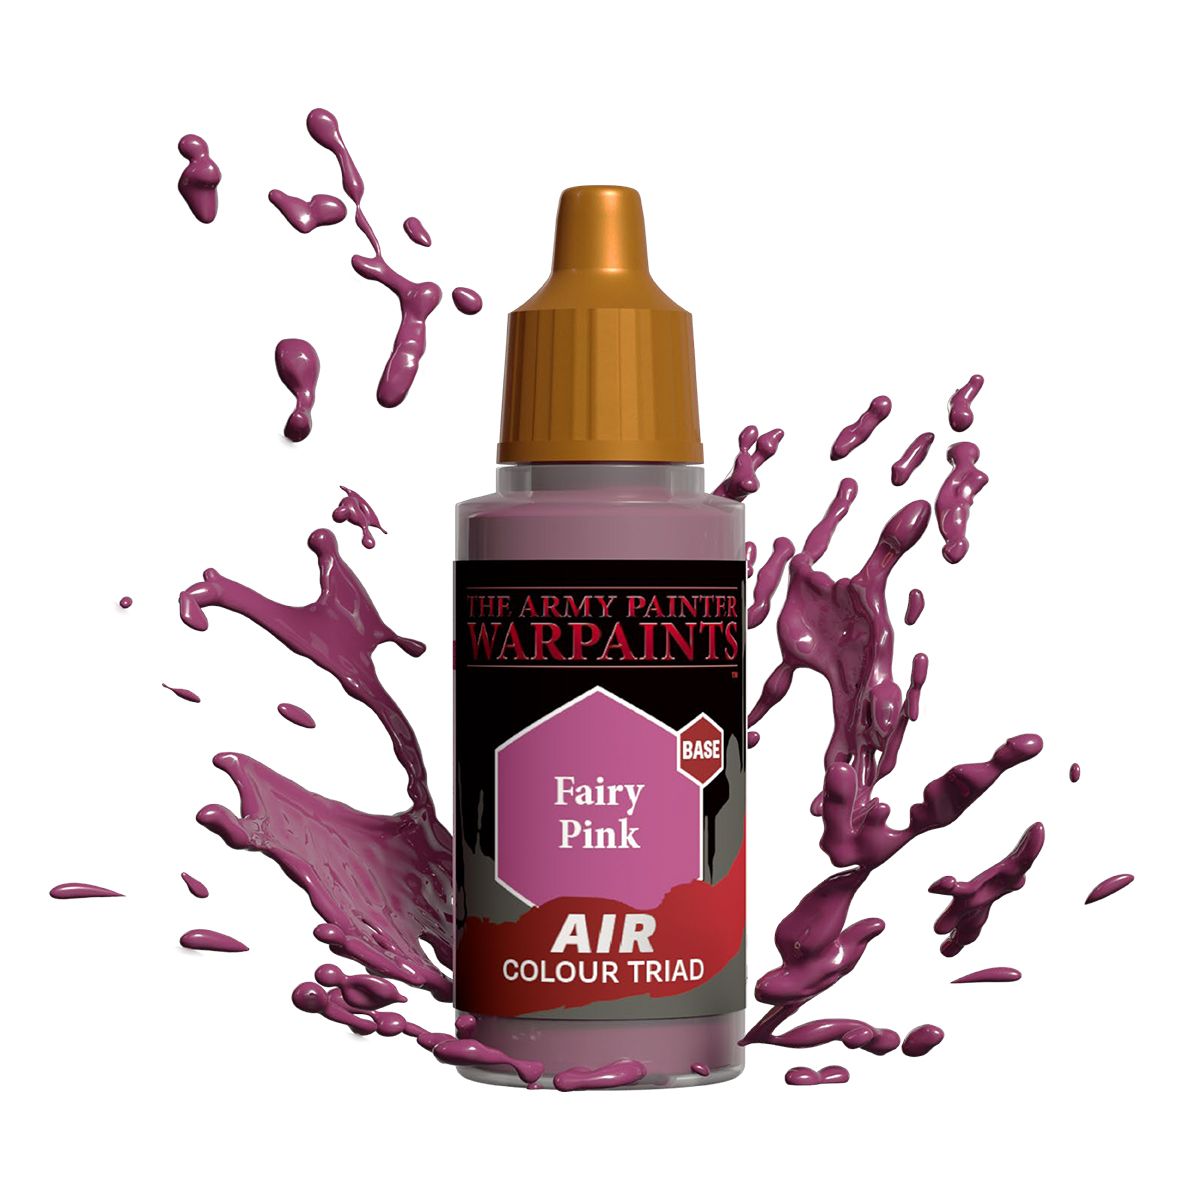 Army Painter Warpaint Air - Fairy Pink (18ml) - Loaded Dice